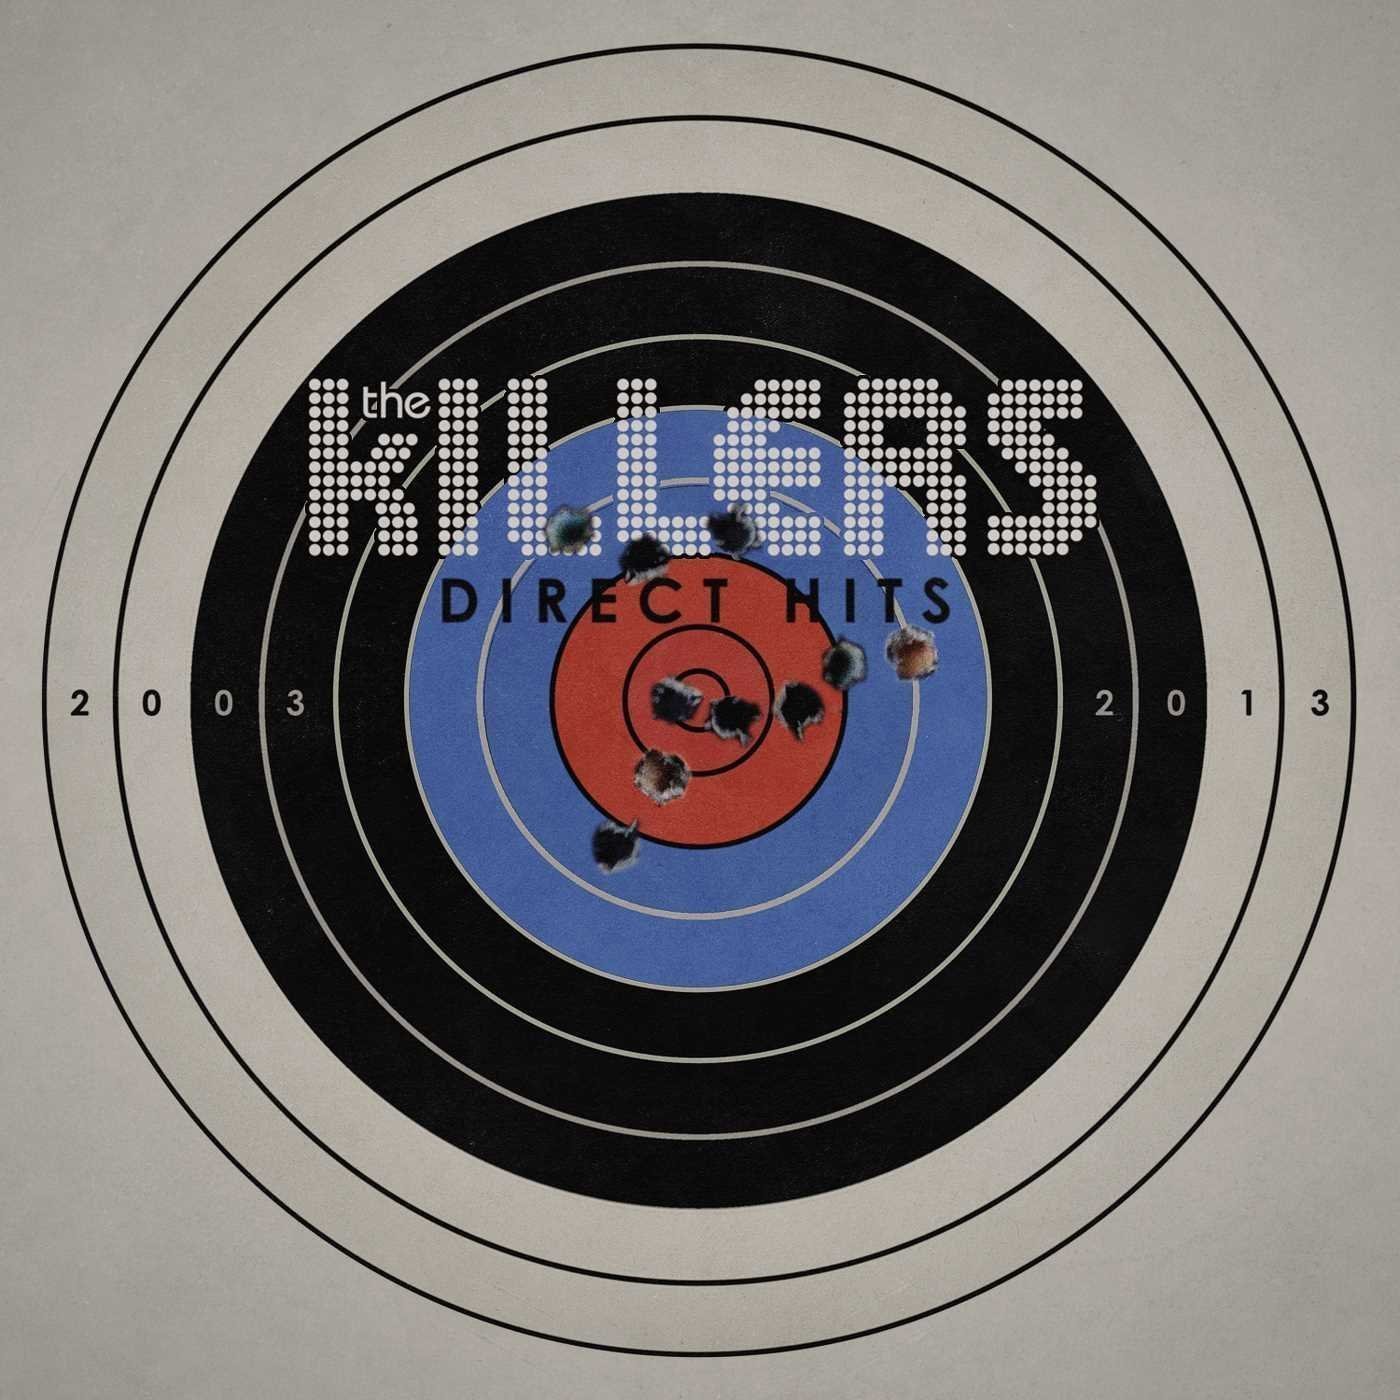 LP The Killers - Direct Hits (2 LP)